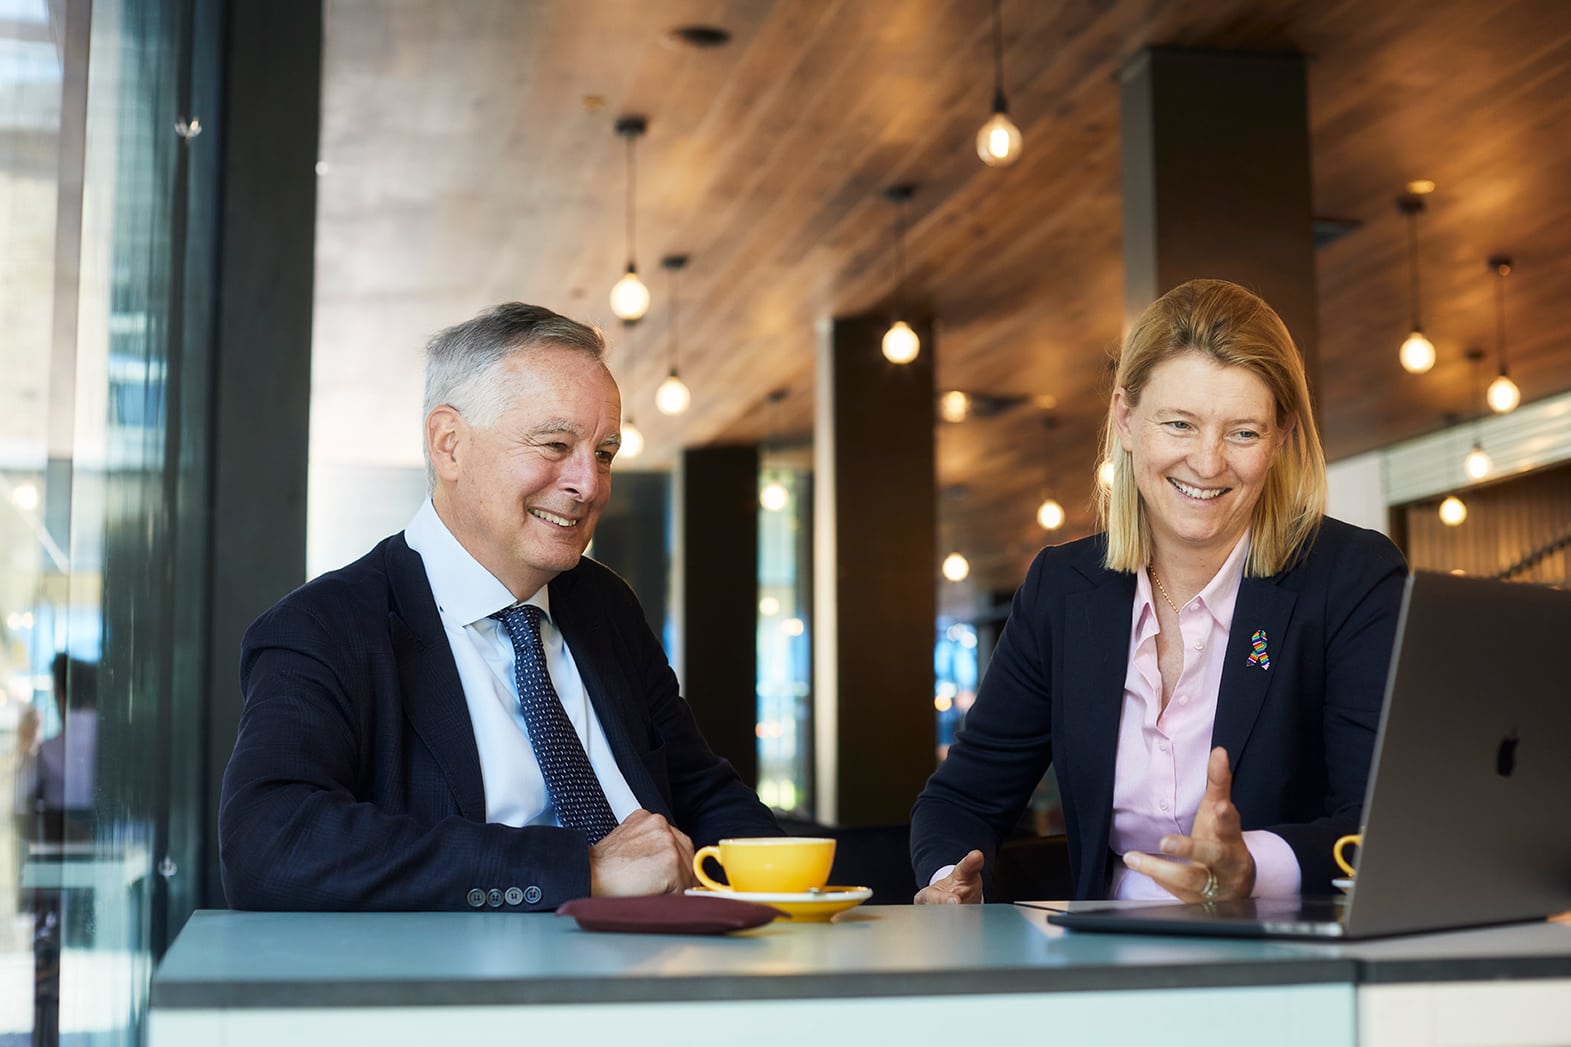 Mike Rees (right) and Lisa Smith (left) sitting in front of and looking at a laptop. There is a yellow cup in front of Mike Rees. Both of them are smiling.